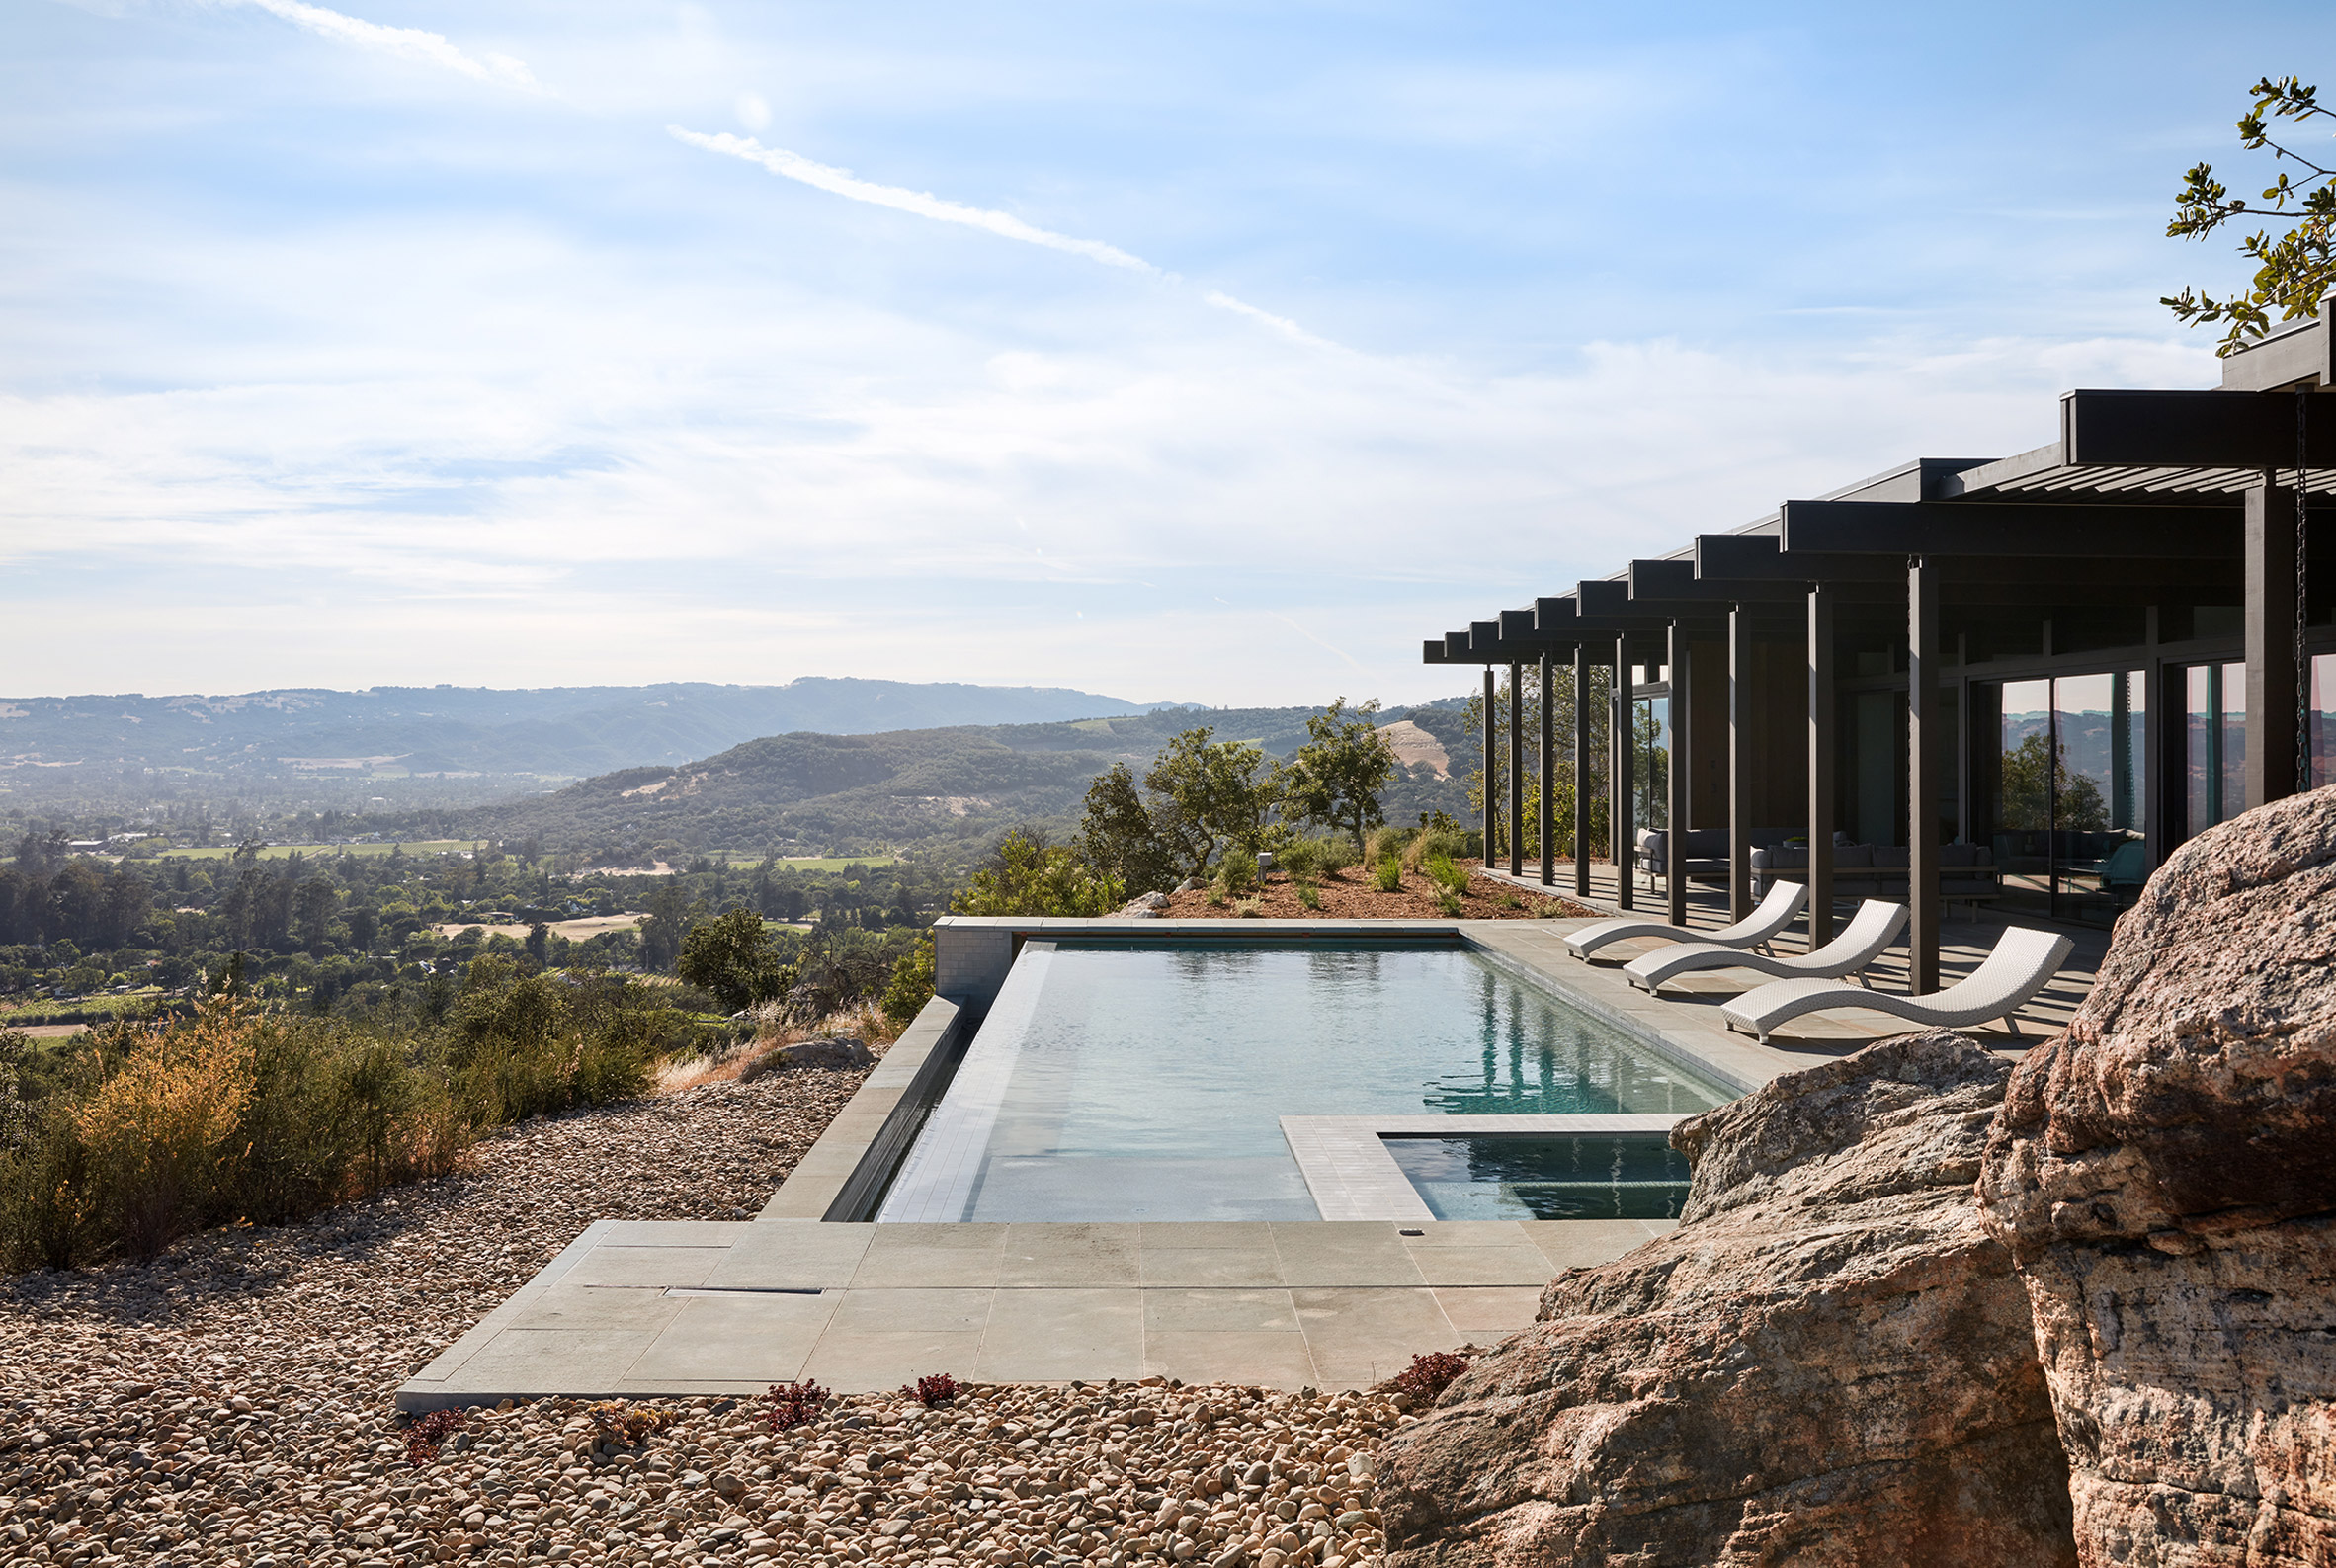 Open-air swimming pool with views of Sonoma, California